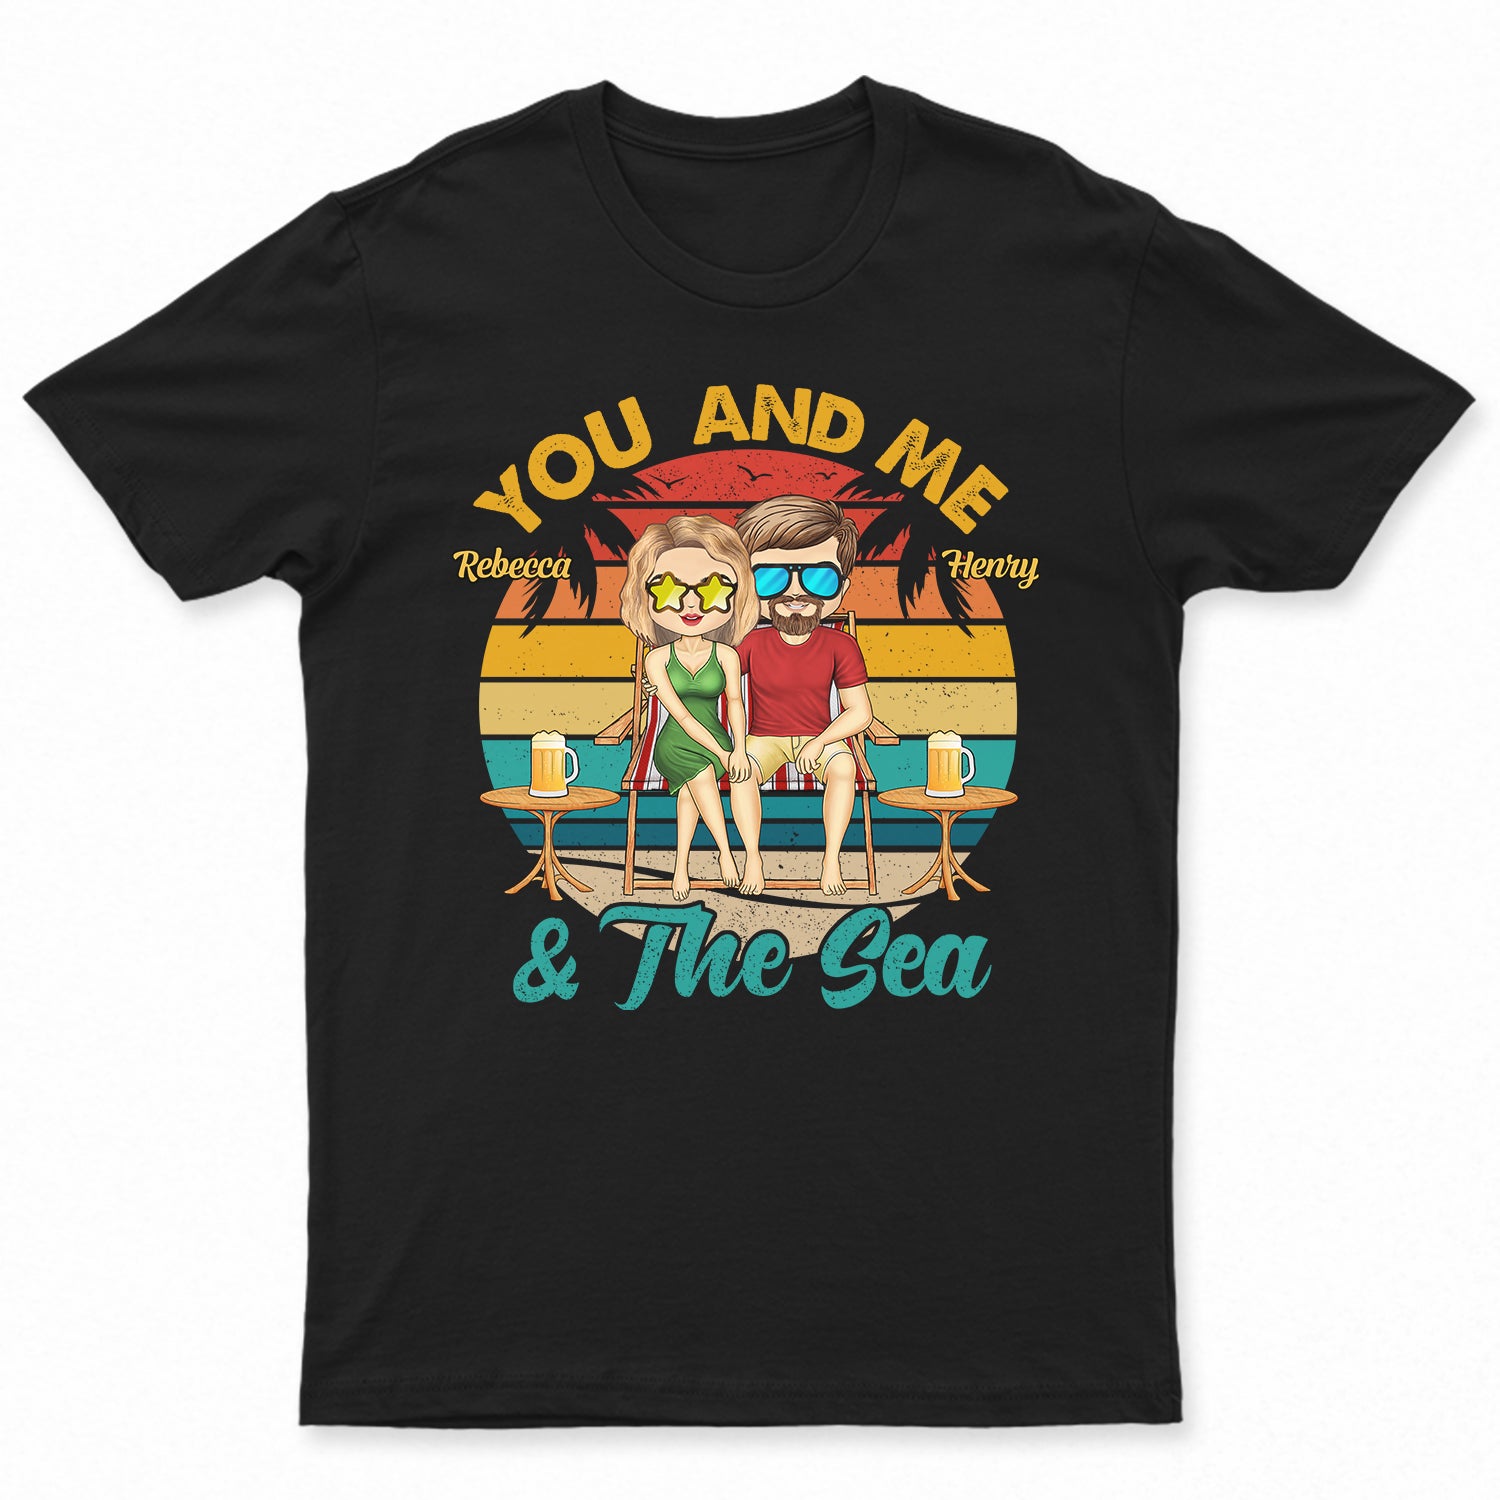 You & Me And The Sea Retro Beach - Birthday, Loving, Anniversary, Vacation, Travel Gift For Spouse, Husband, Wife, Couple, Boyfriend, Girlfriend - Personalized T Shirt